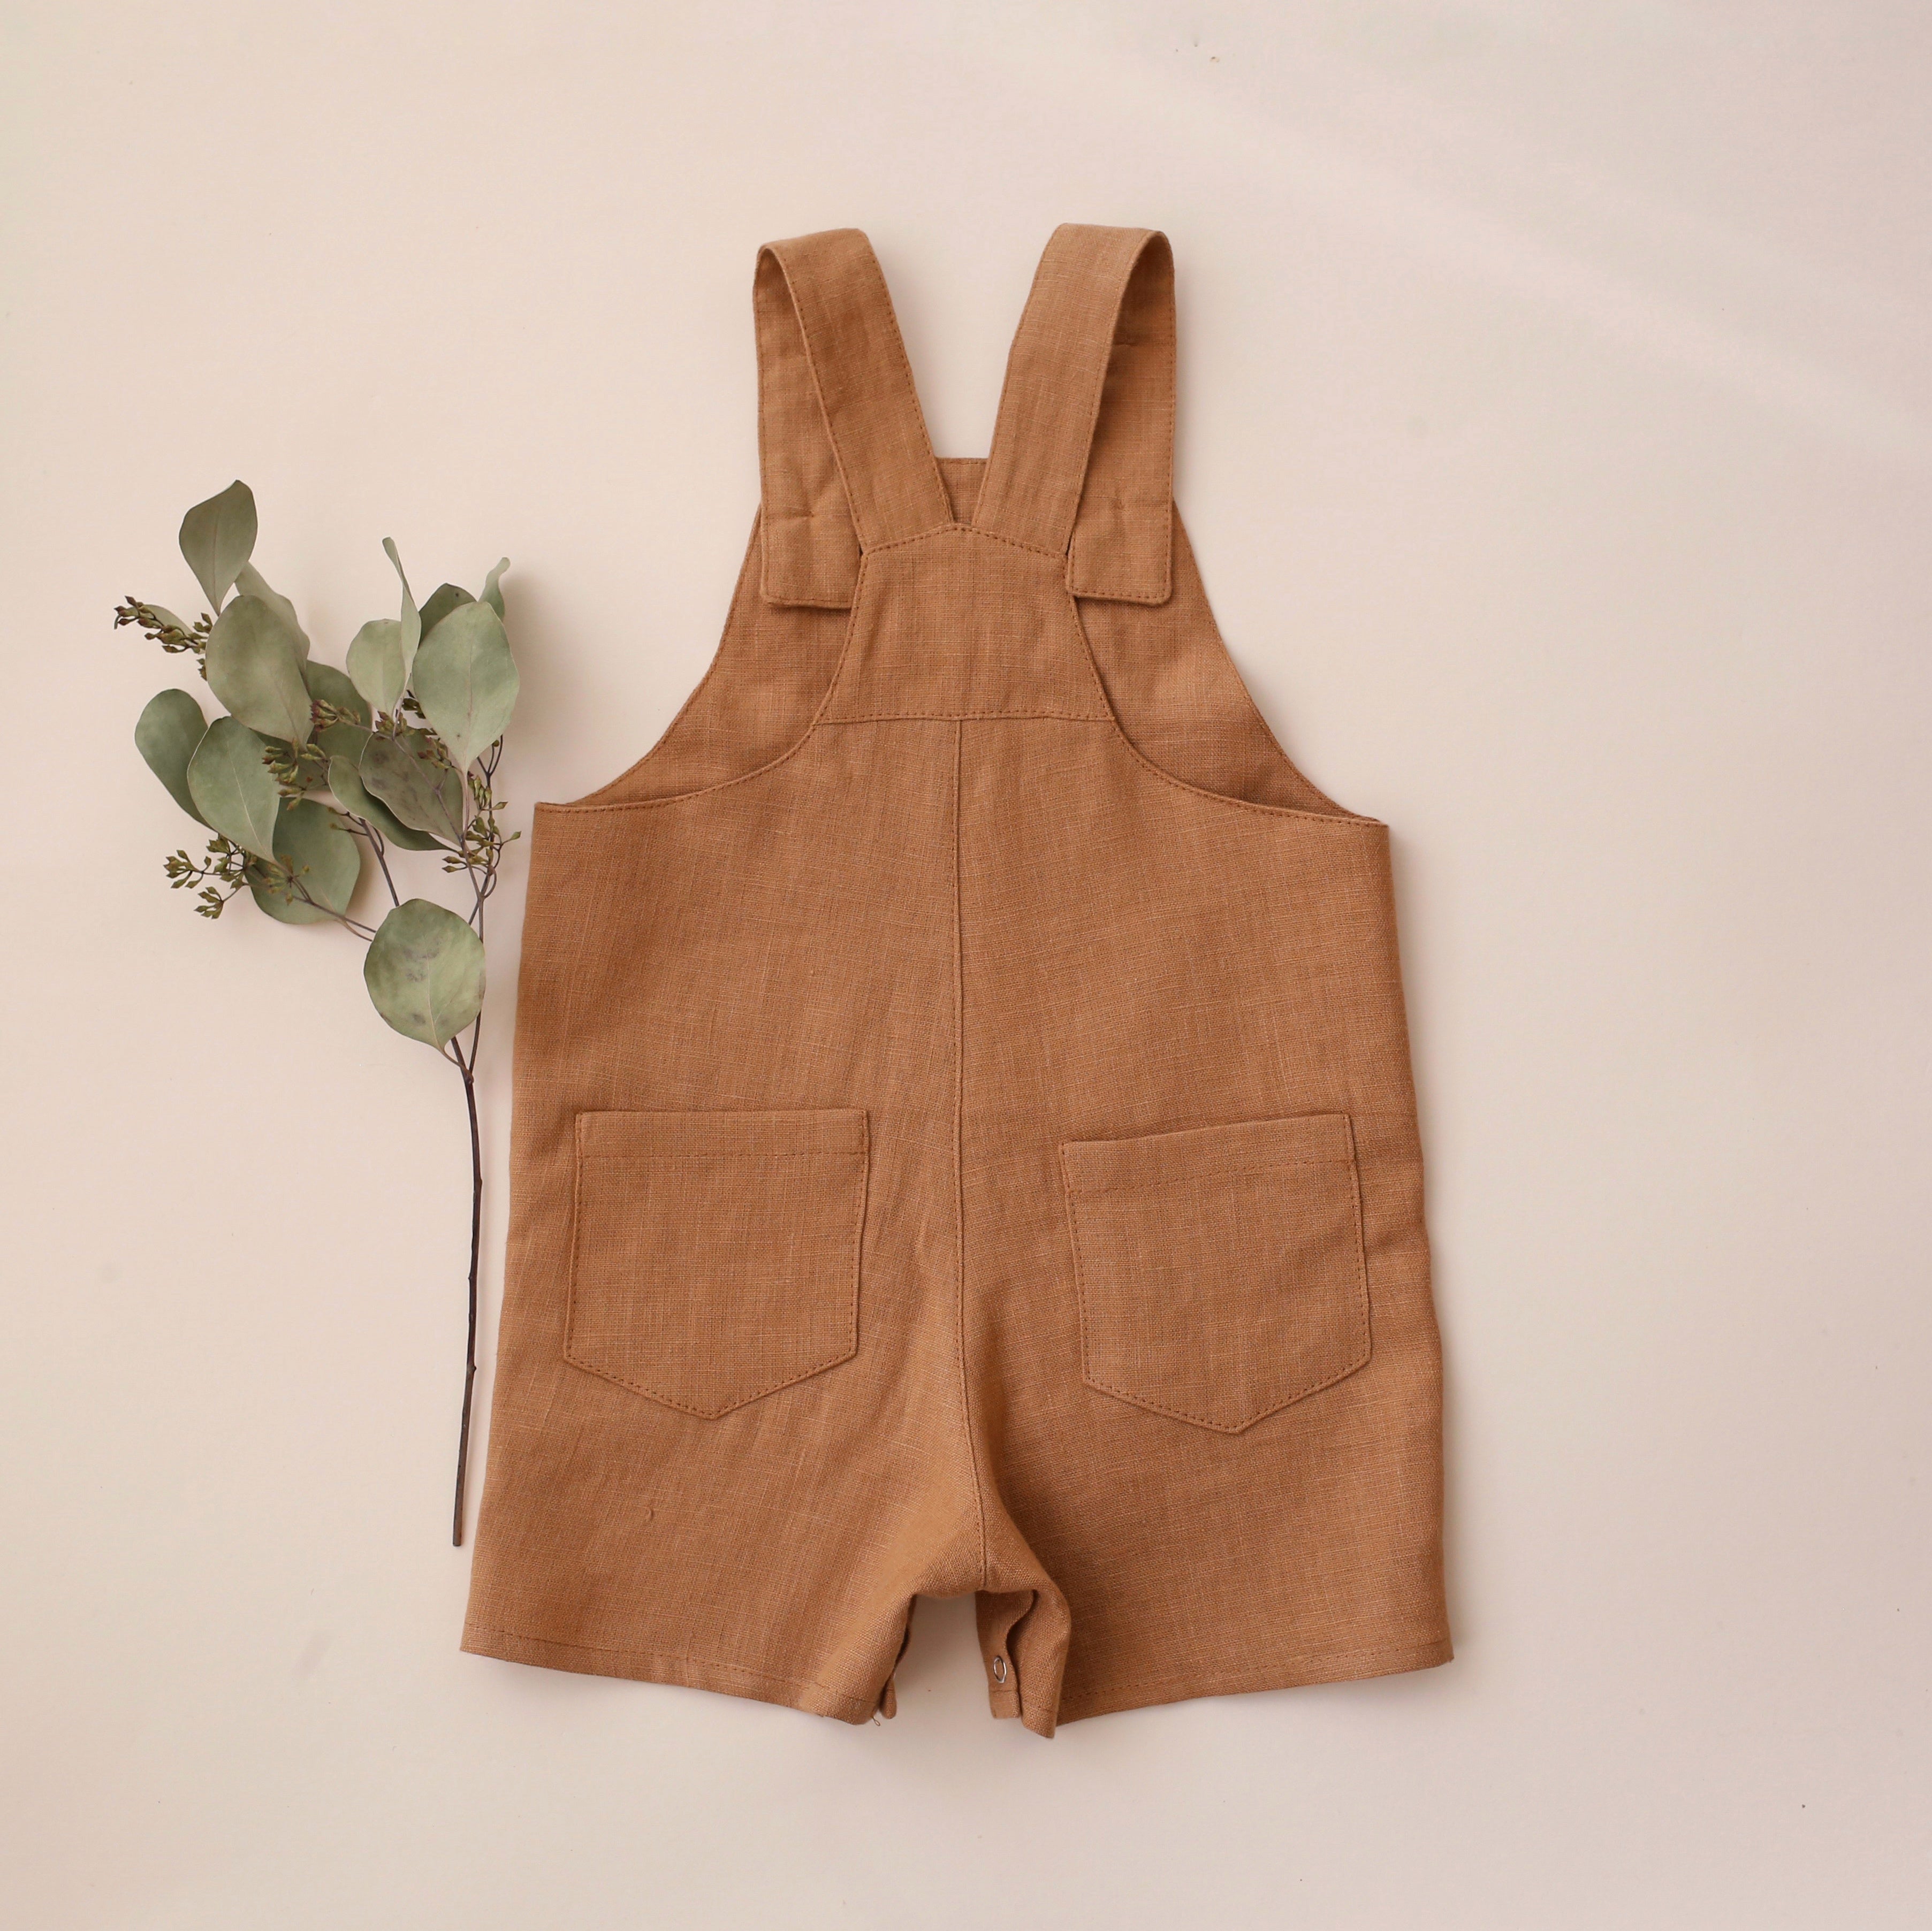 Latte Linen Buttoned Short Dungaree with “Rabbit” Embroidery